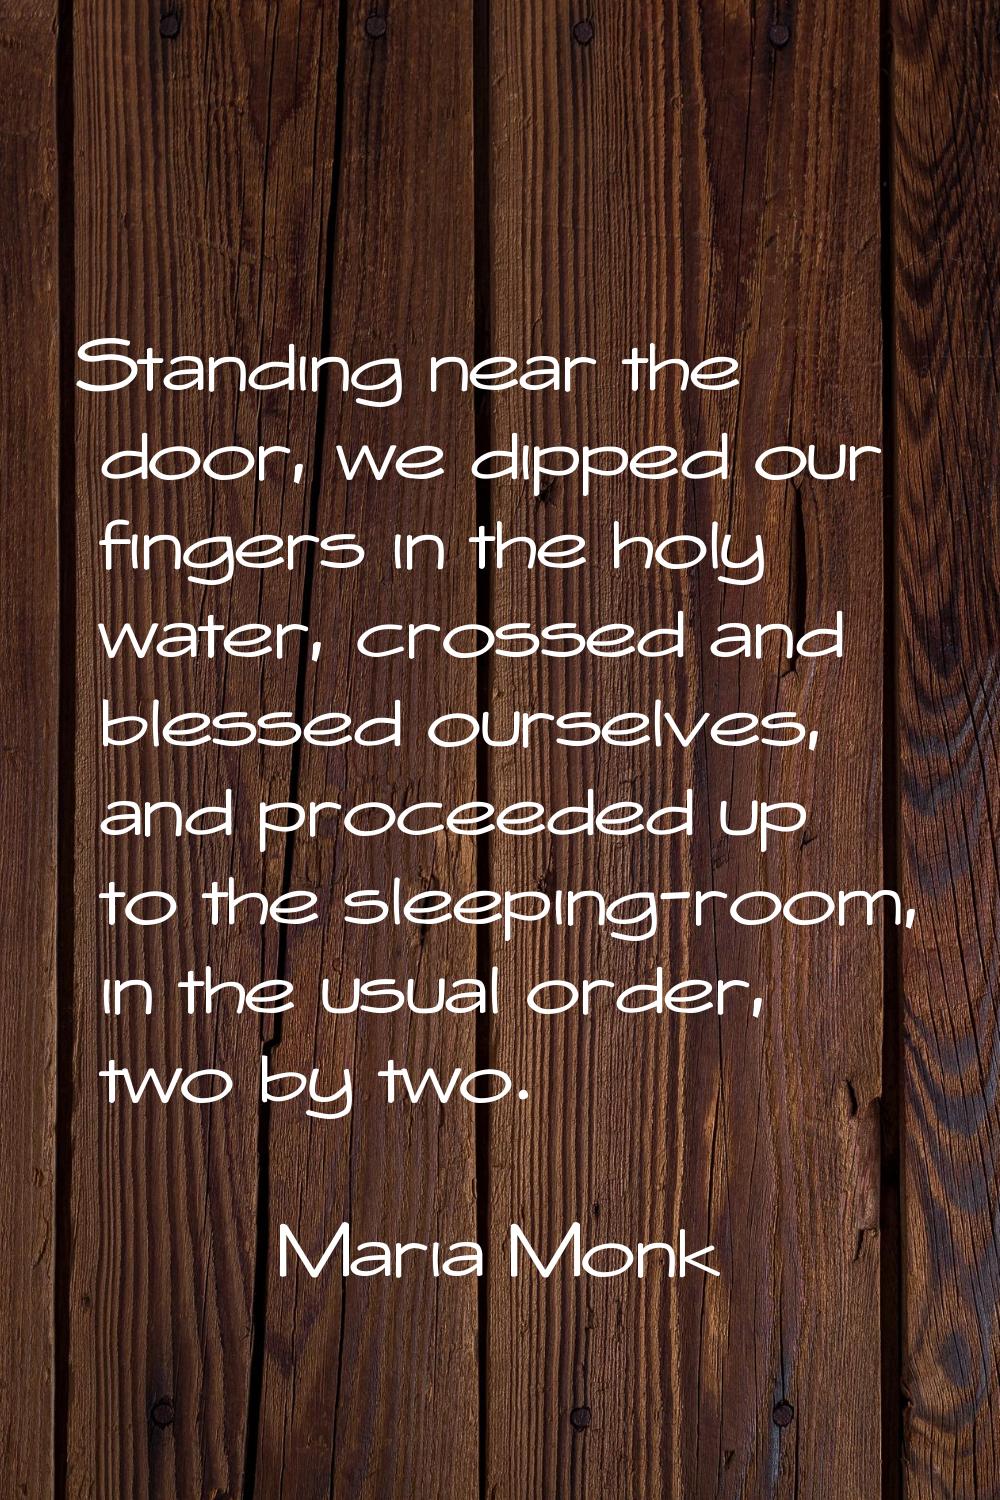 Standing near the door, we dipped our fingers in the holy water, crossed and blessed ourselves, and